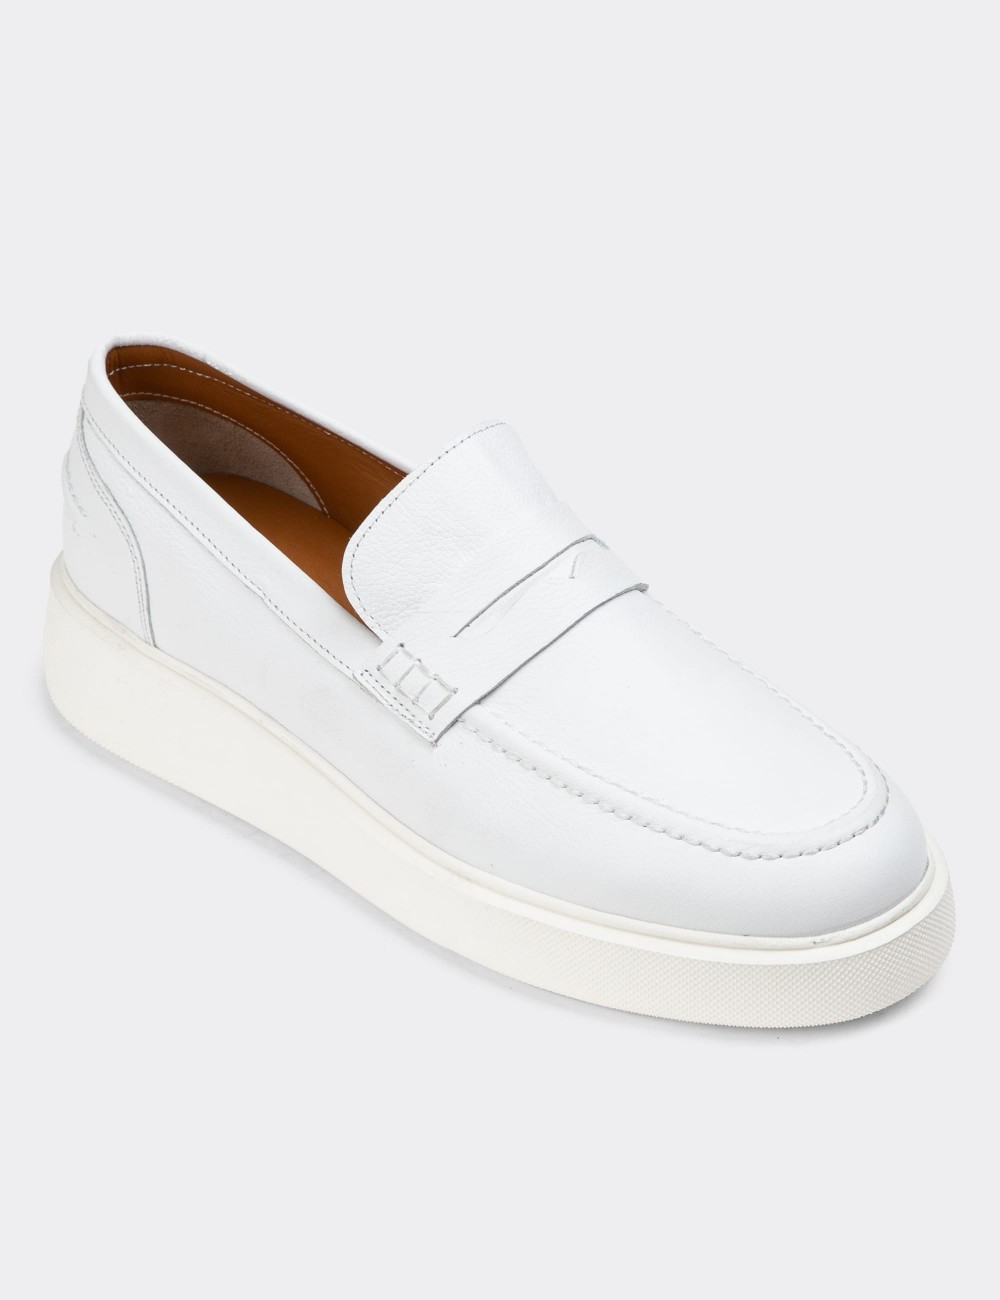 White Leather Loafers - 01964MBYZE01